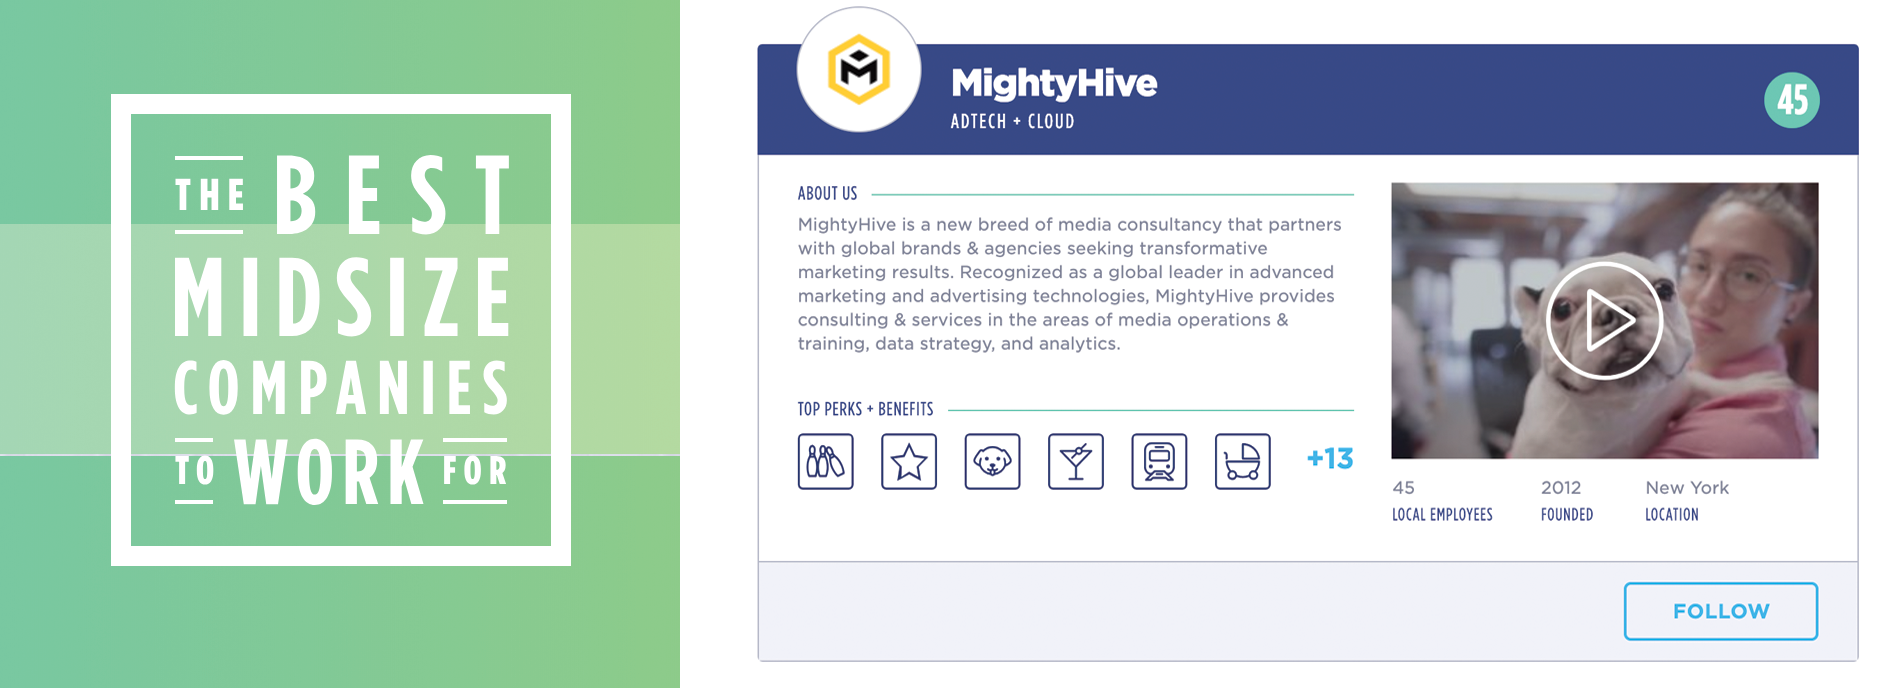 mightyhive named to best midsize company to work for ranking image